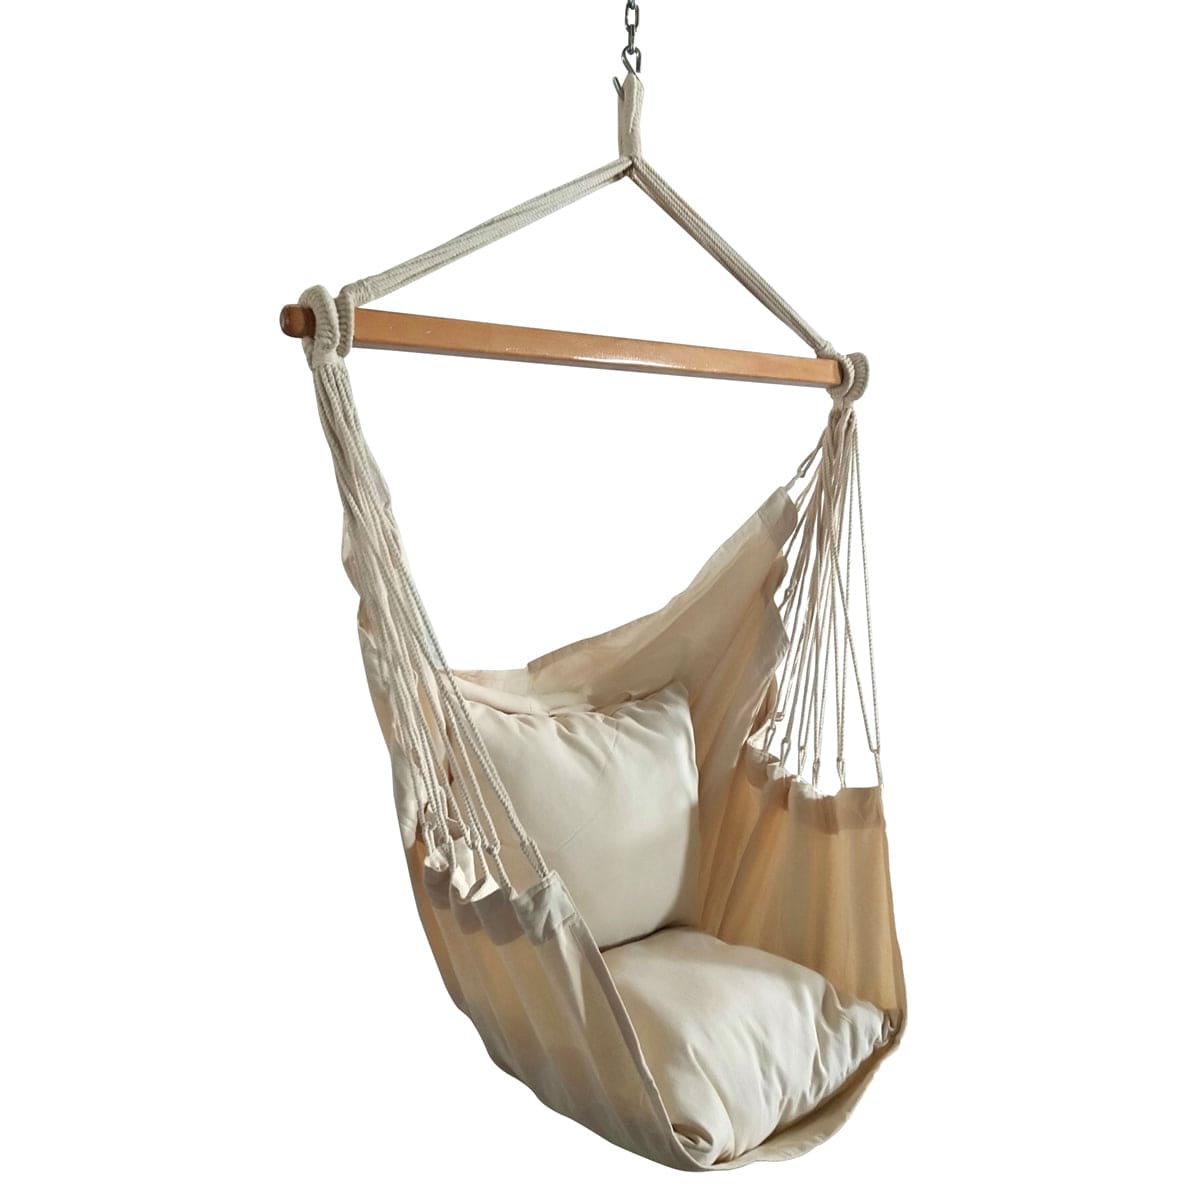 Cotton Swing Chair With Cushions Natural Oatmeal, Weight Capacity of 115 kg- 100D X 100W X 130H cm